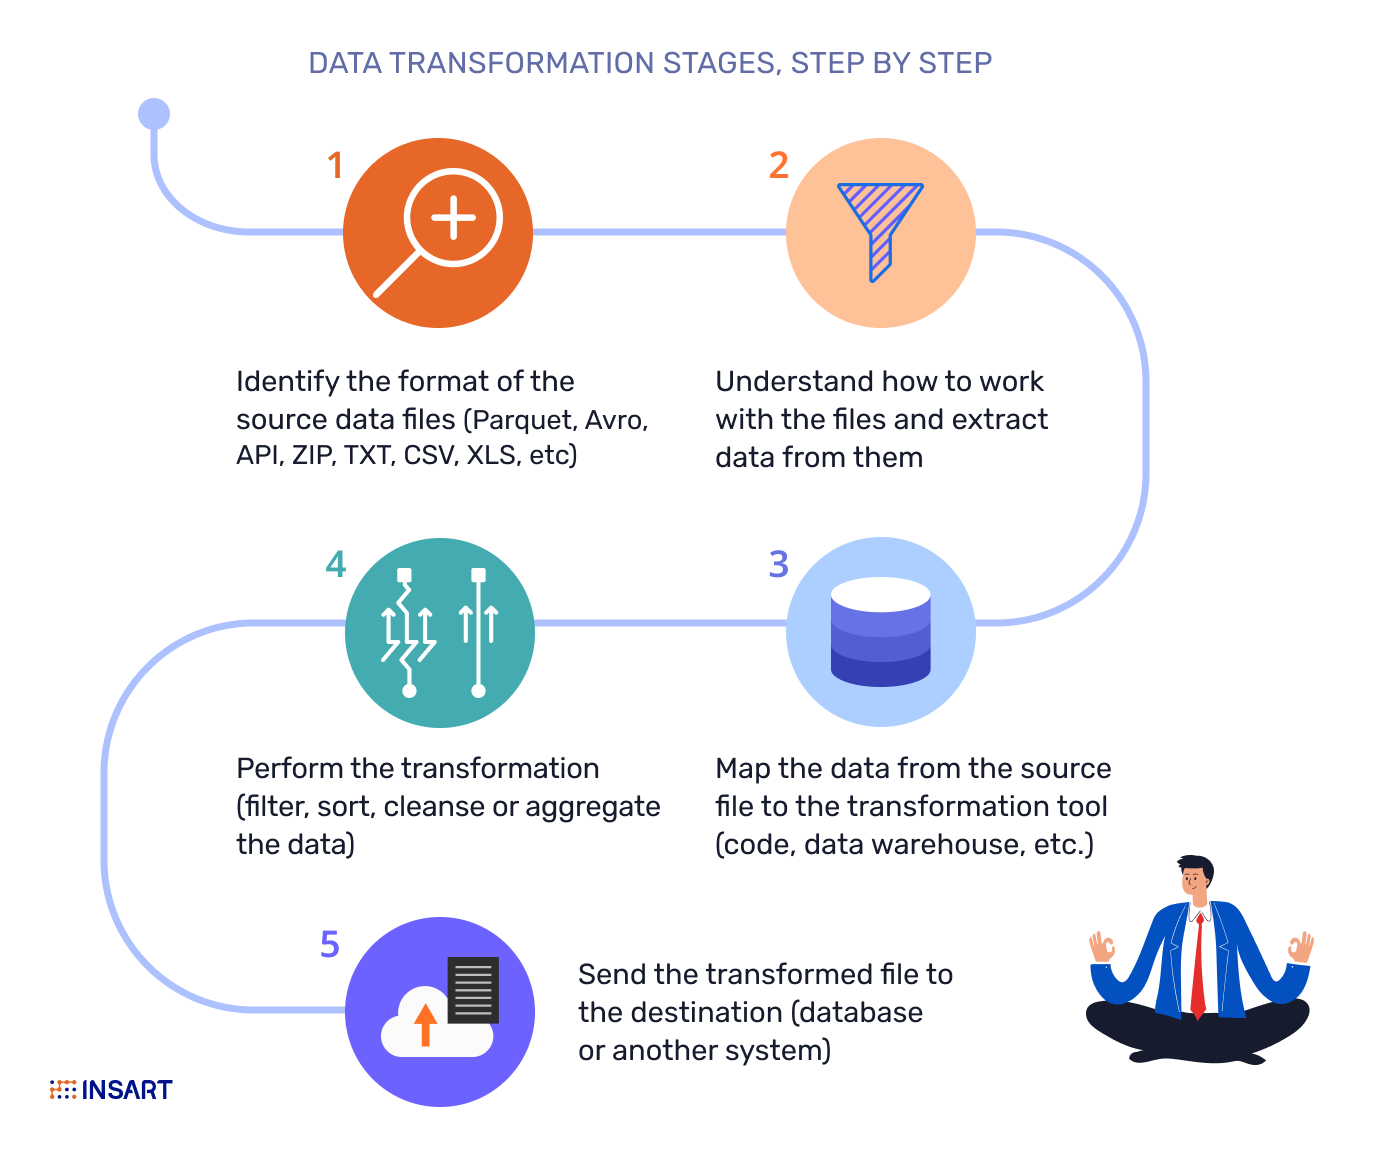 Data transformation stages